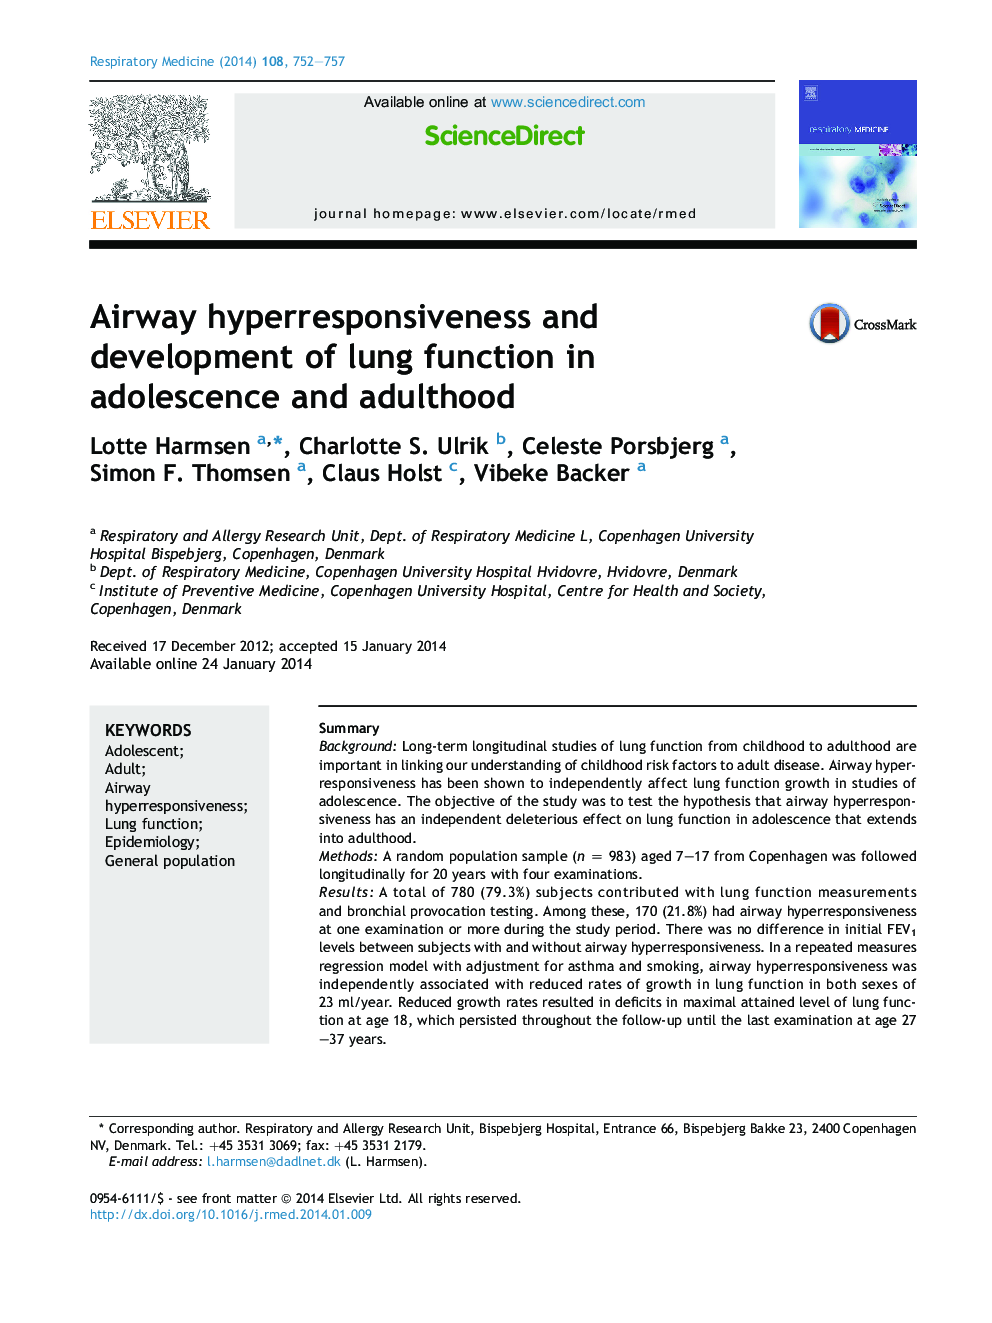 Airway hyperresponsiveness and development of lung function in adolescence and adulthood